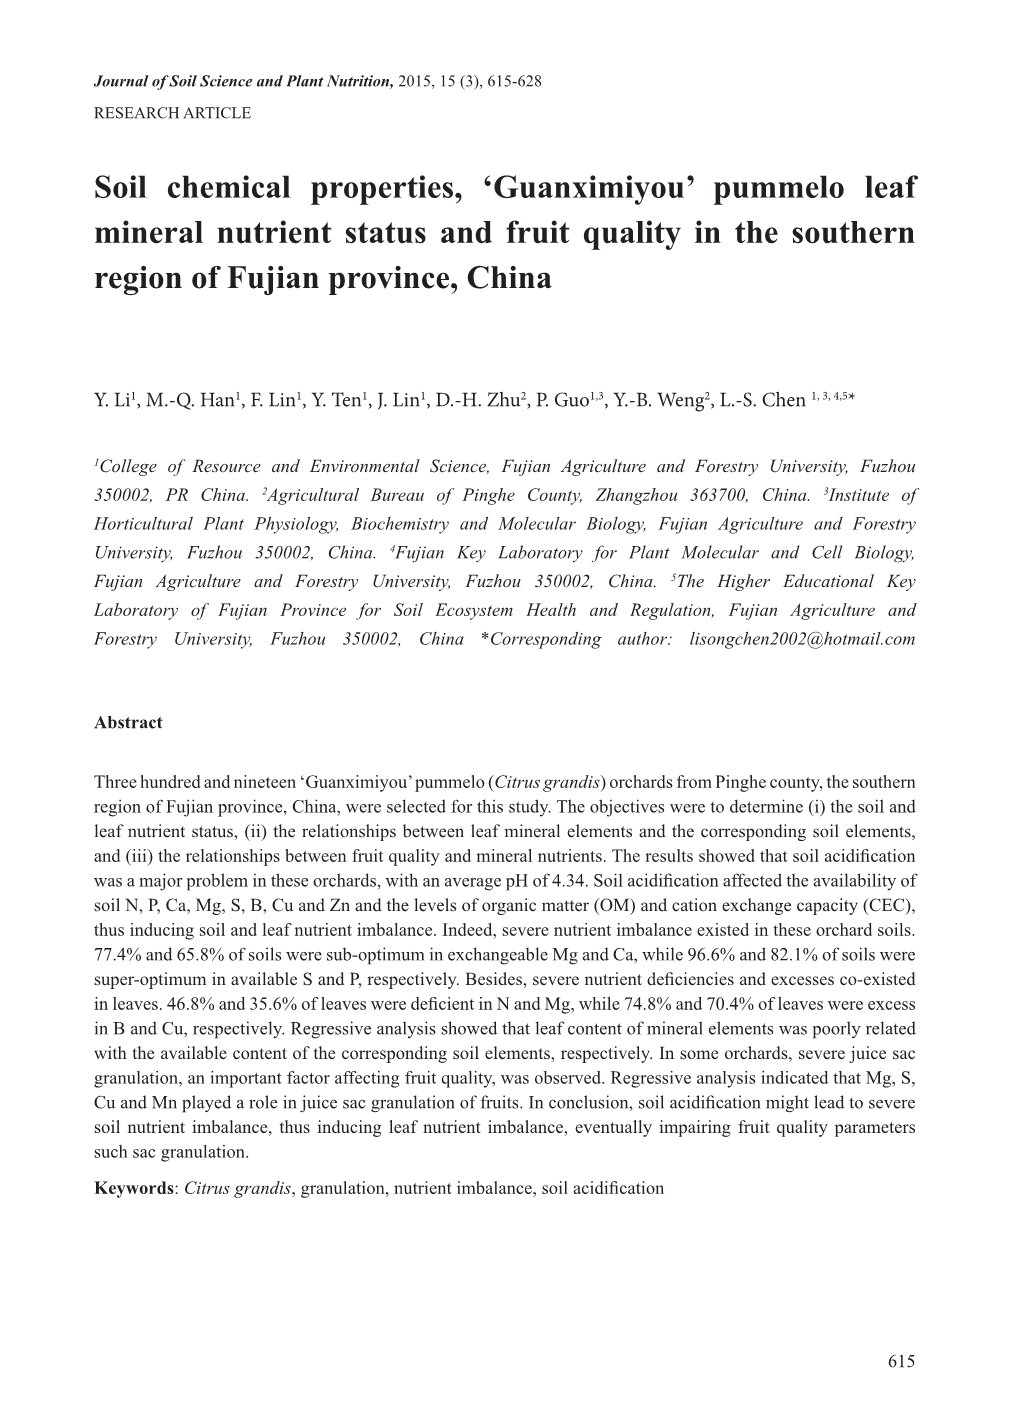 'Guanximiyou' Pummelo Leaf Mineral Nutrient Status and Fruit Quality in The